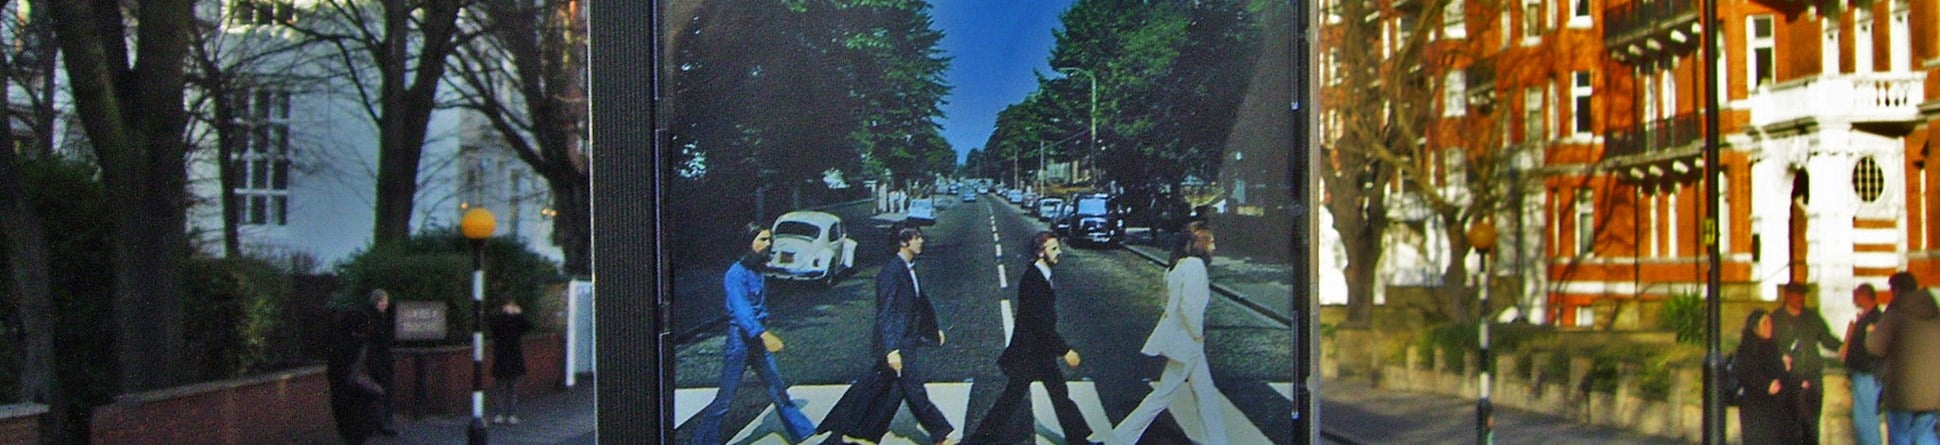 The famous zebra crossing near Abbey Road Studios and the Beatles Album cover "Abbey Road" which immortalised the street.